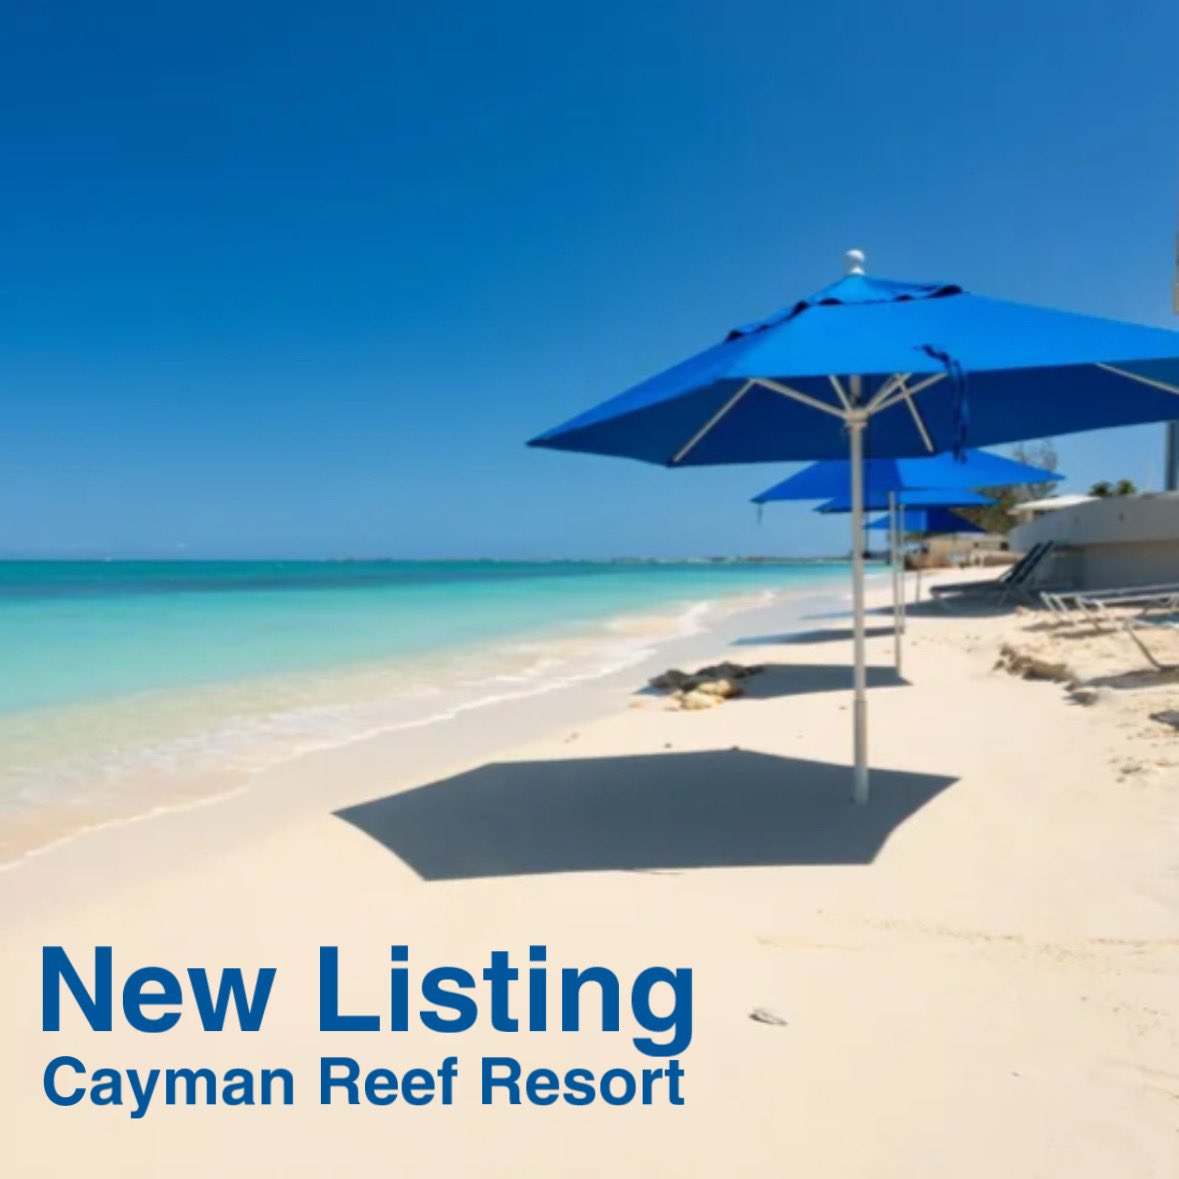 Cayman Reef Resort

Beyond the tranquility of the beach, is the convenience of walking to the shops & restaurants of Camana Bay

Member of CIREBA 
MLS # 417623

#NewListing #Caribbean #Condo #Scuba #Snorkel 
#CaymanRealEstate #caymansothebysrealty #caymanislandsrealestate